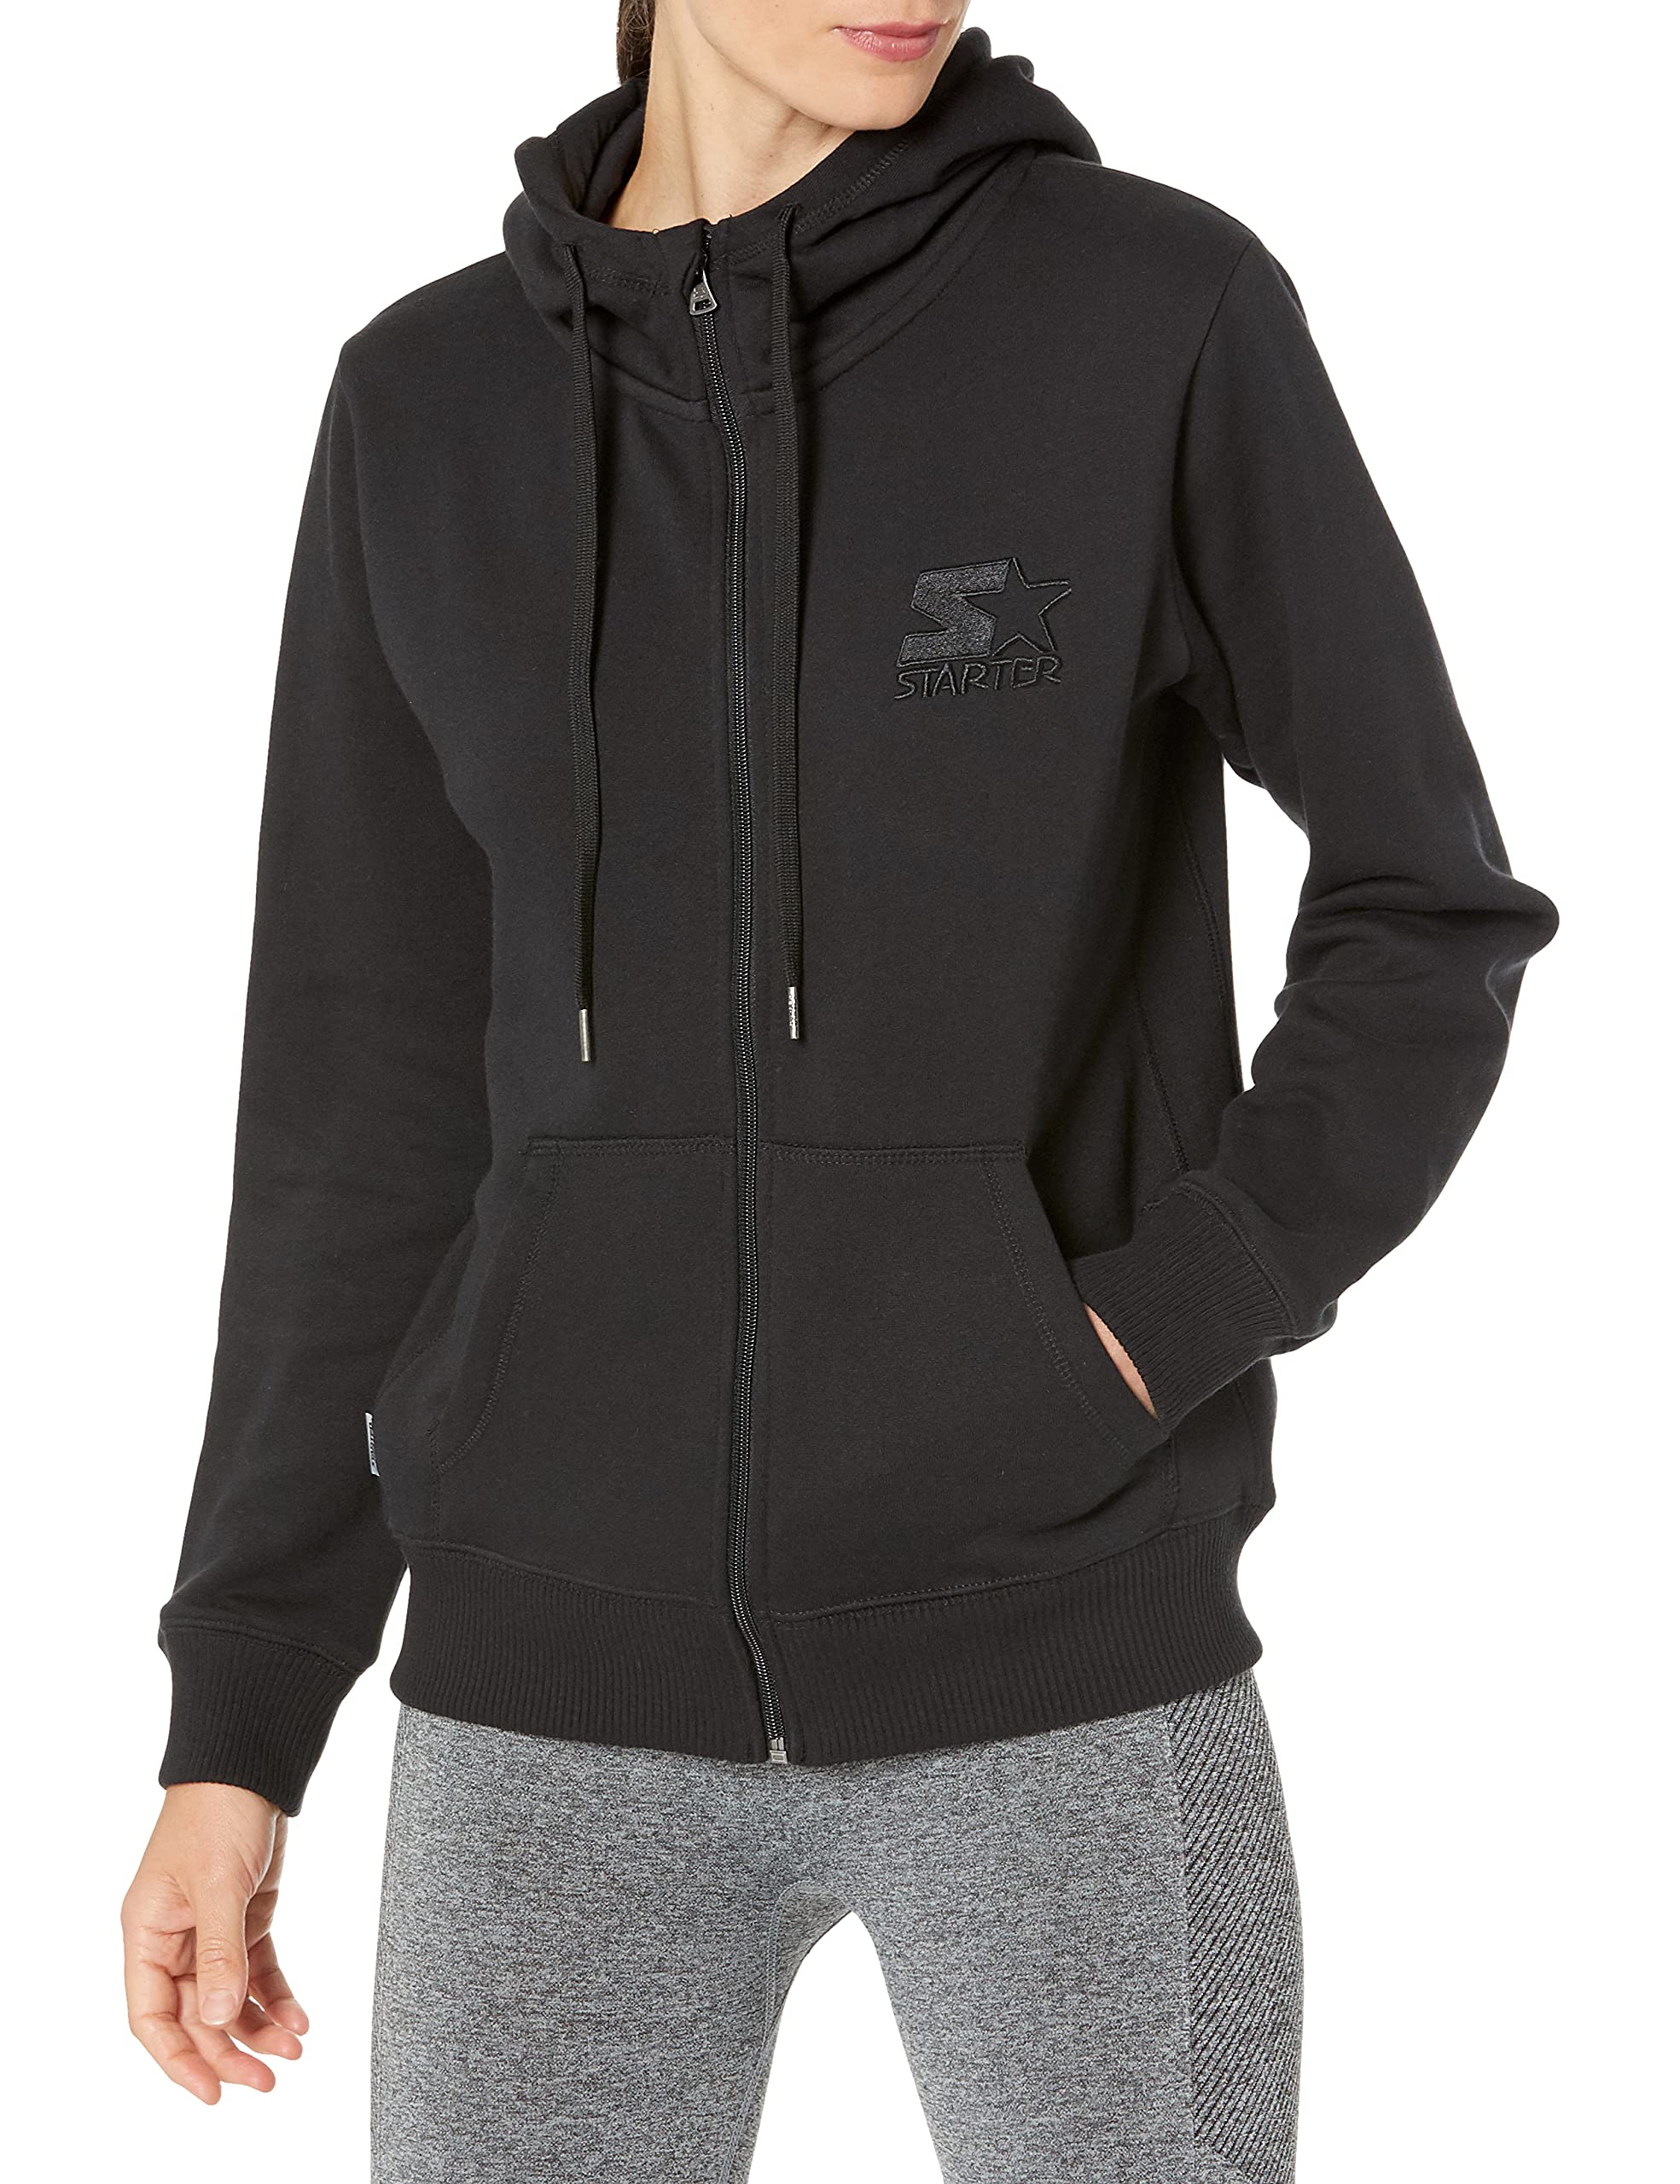 Book Cover Starter Women's Zip-Up Embroidered Logo Hoodie, Amazon Exclusive